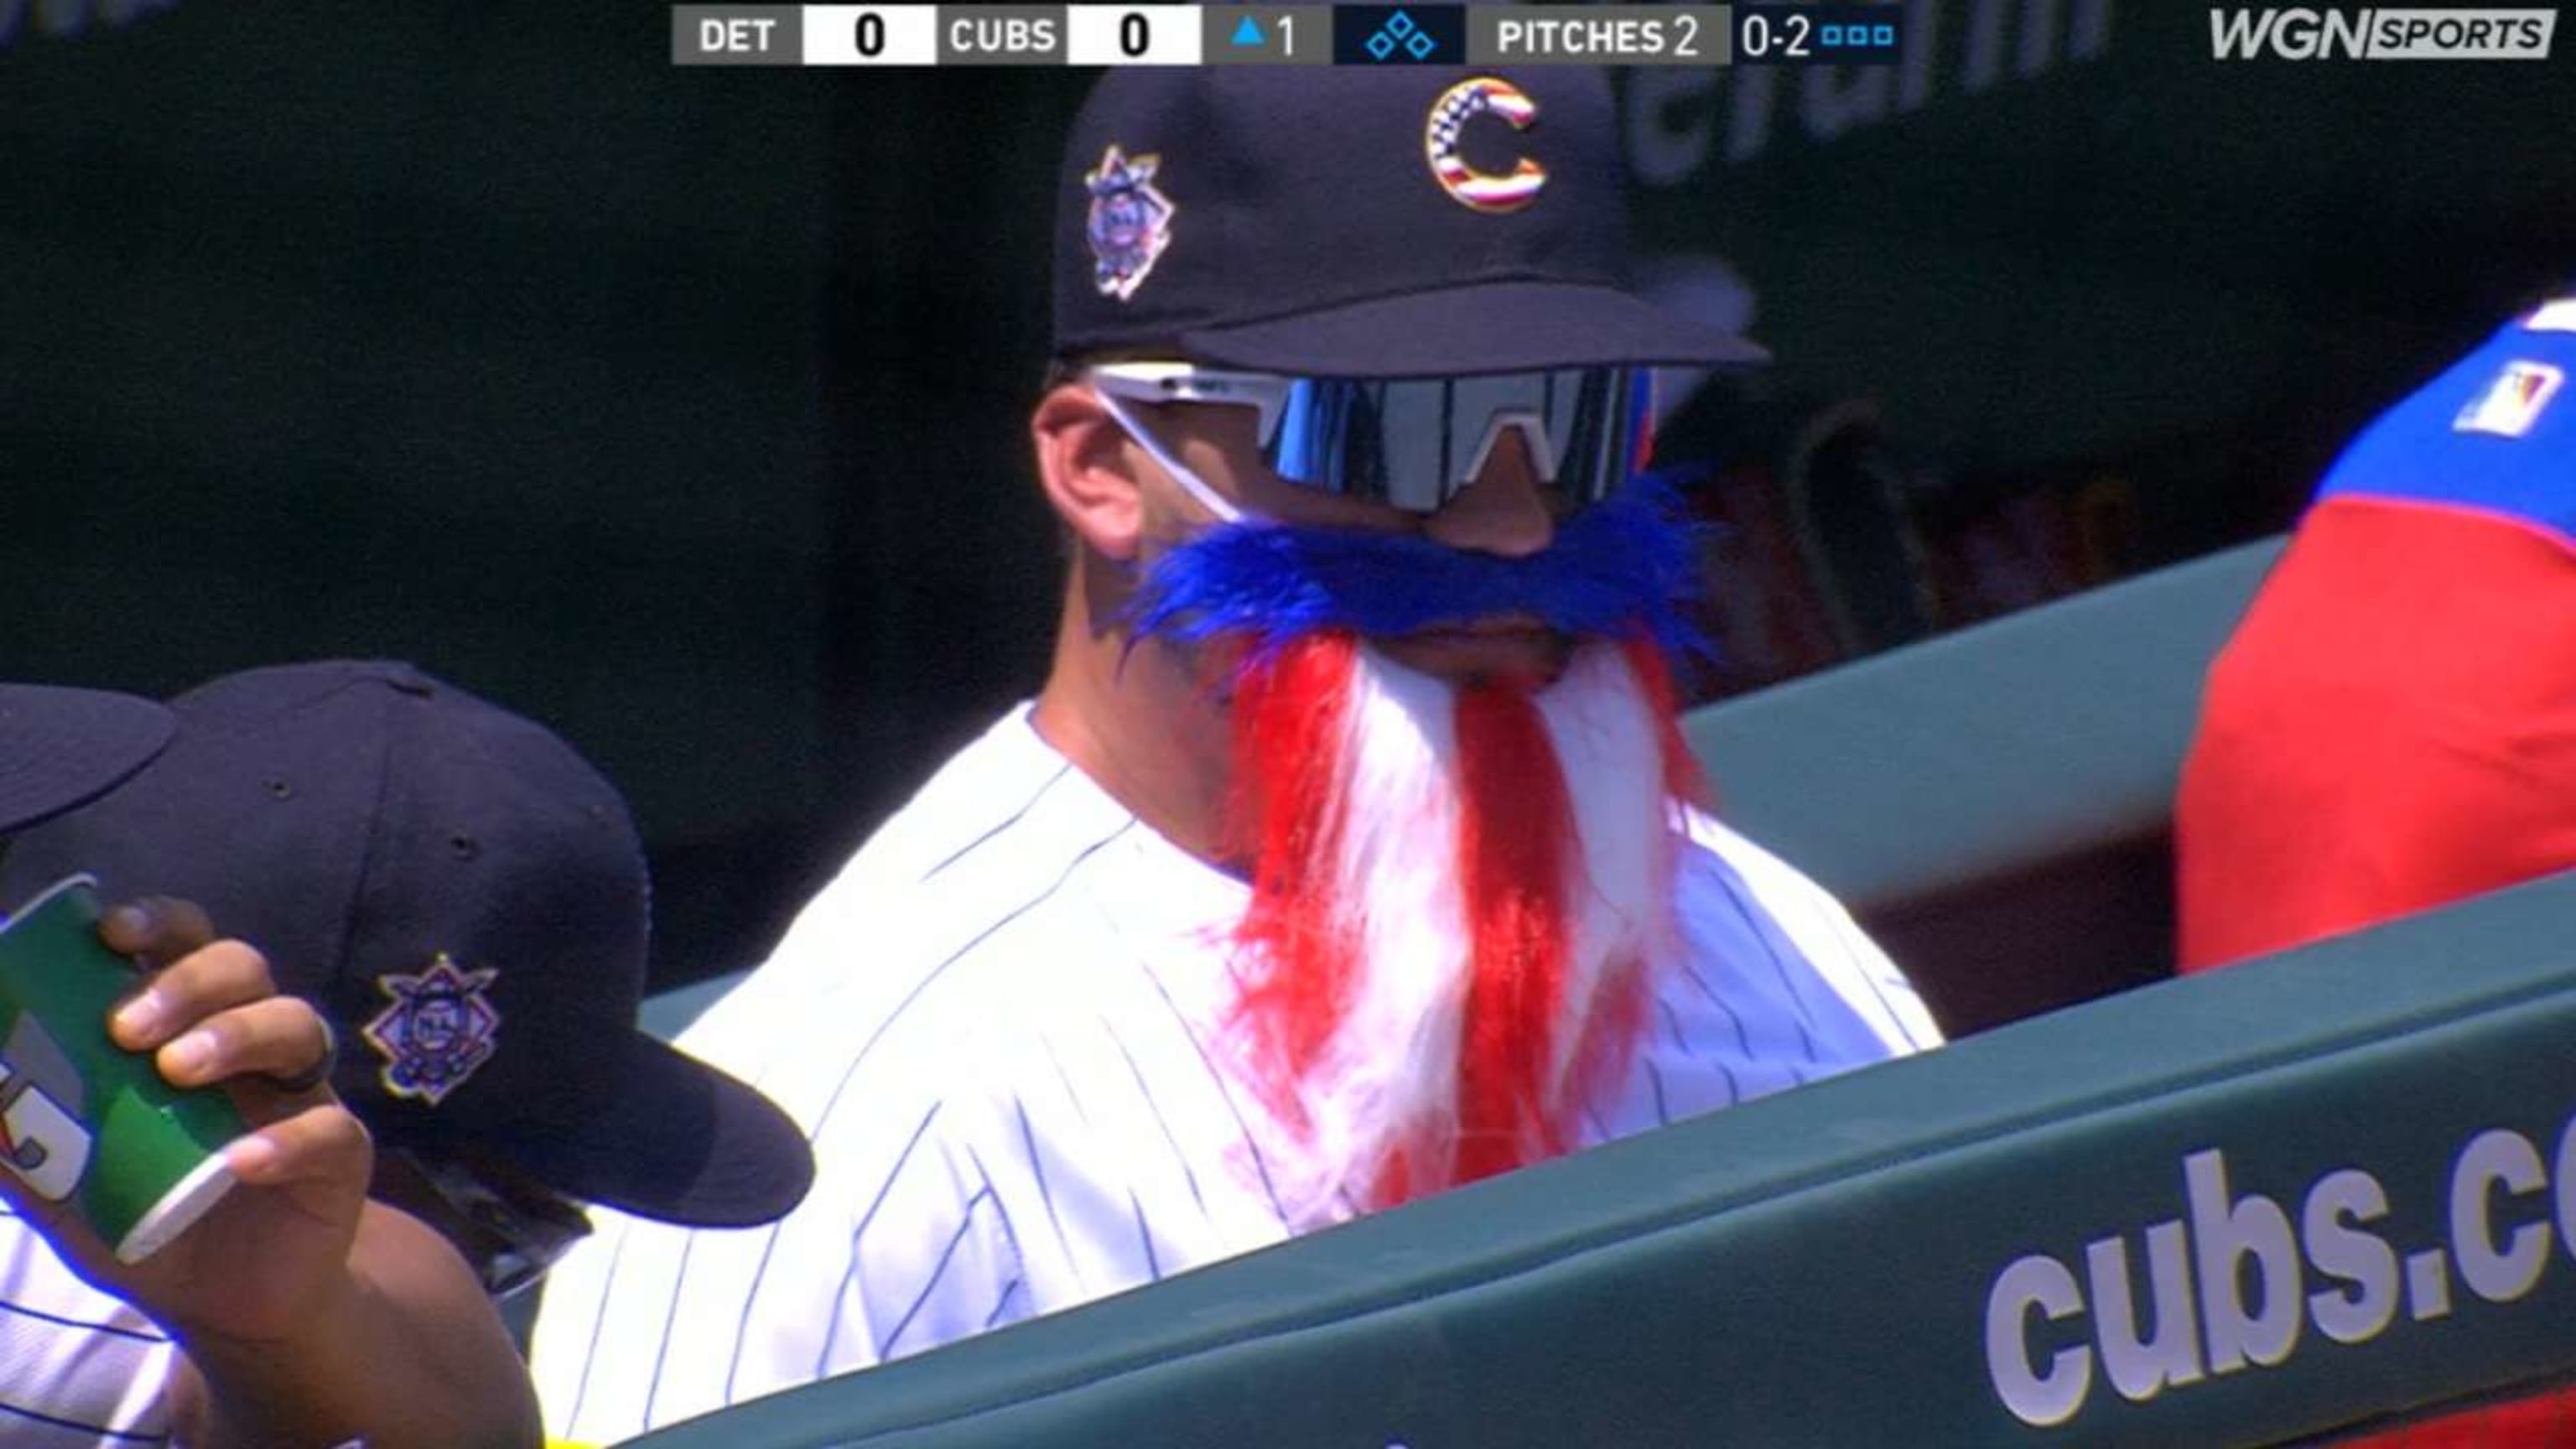 Kyle Schwarber showed up to work on the Fourth of July in a bright red,  white and blue beard